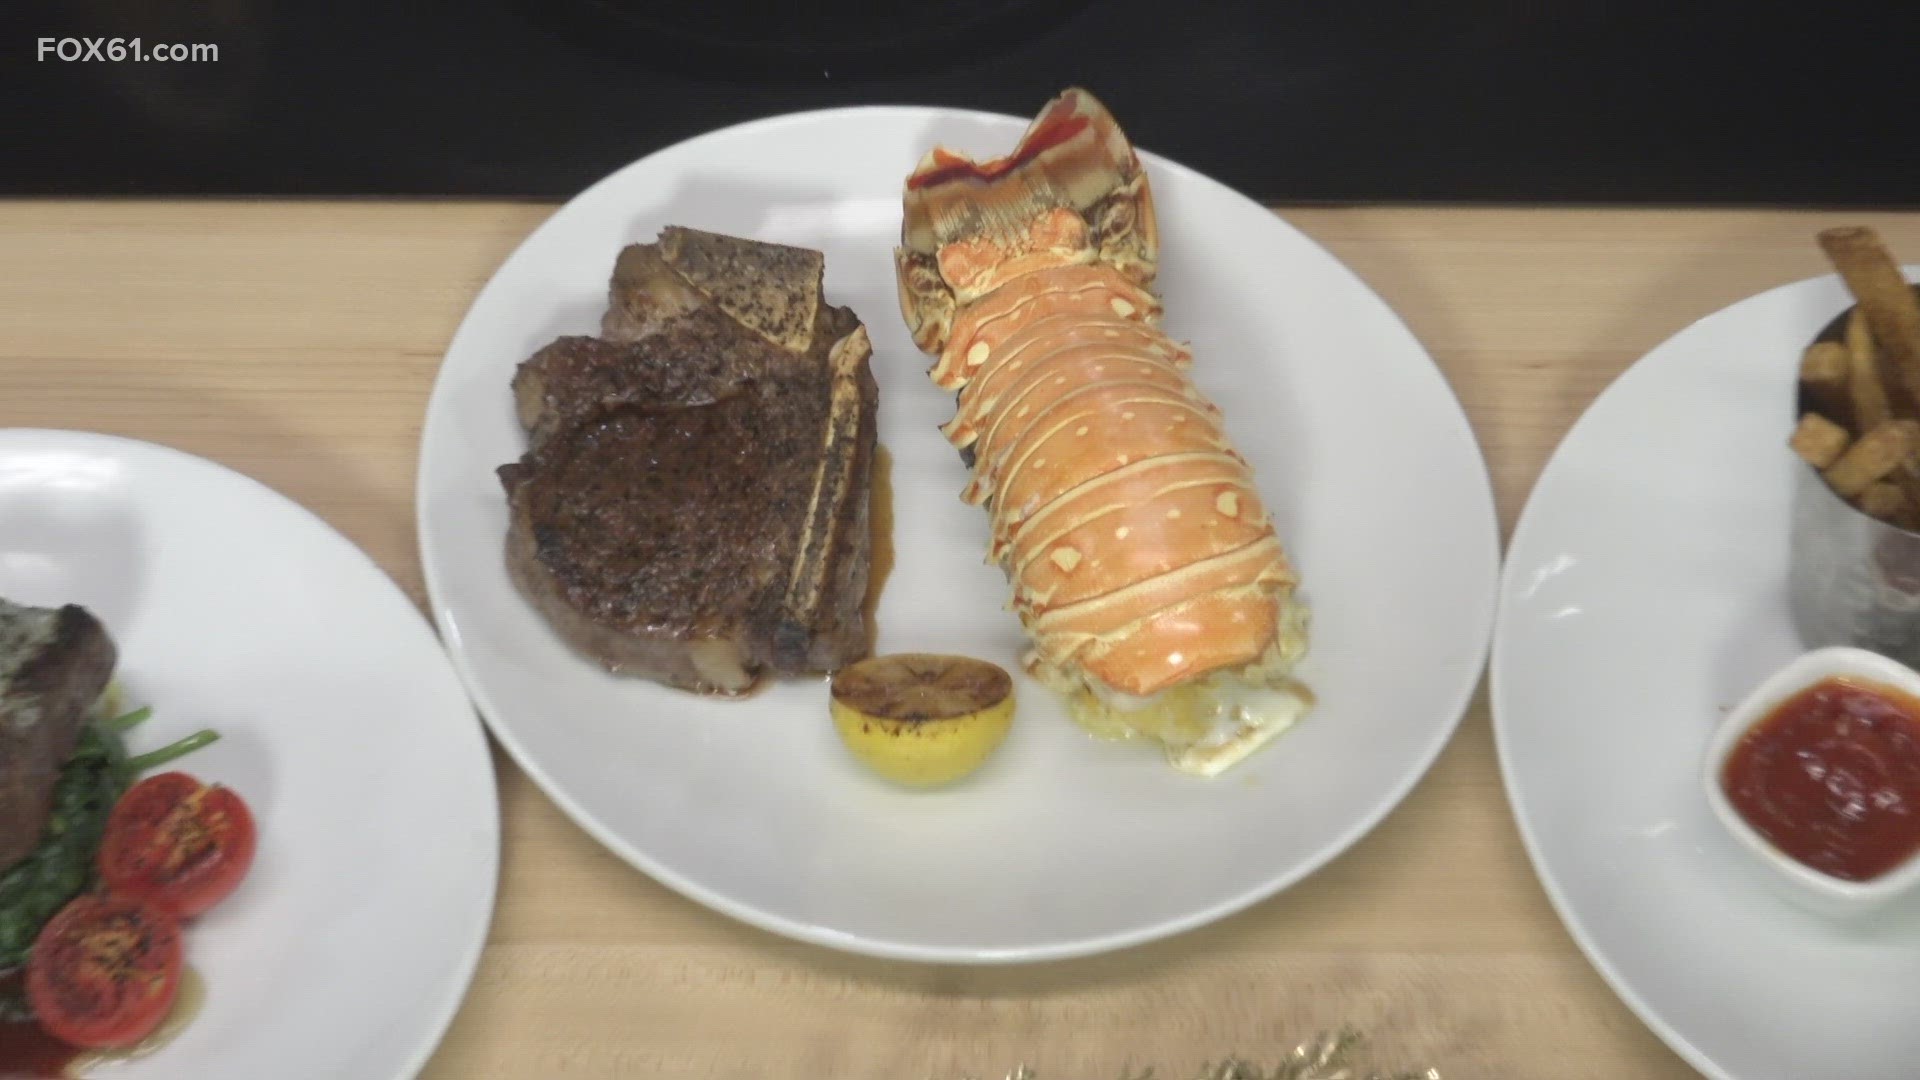 Fleming's Prime Steakhouse and Wine Bar was in the FOX61 ByCarrier Kitchen to showcase some of their great food.